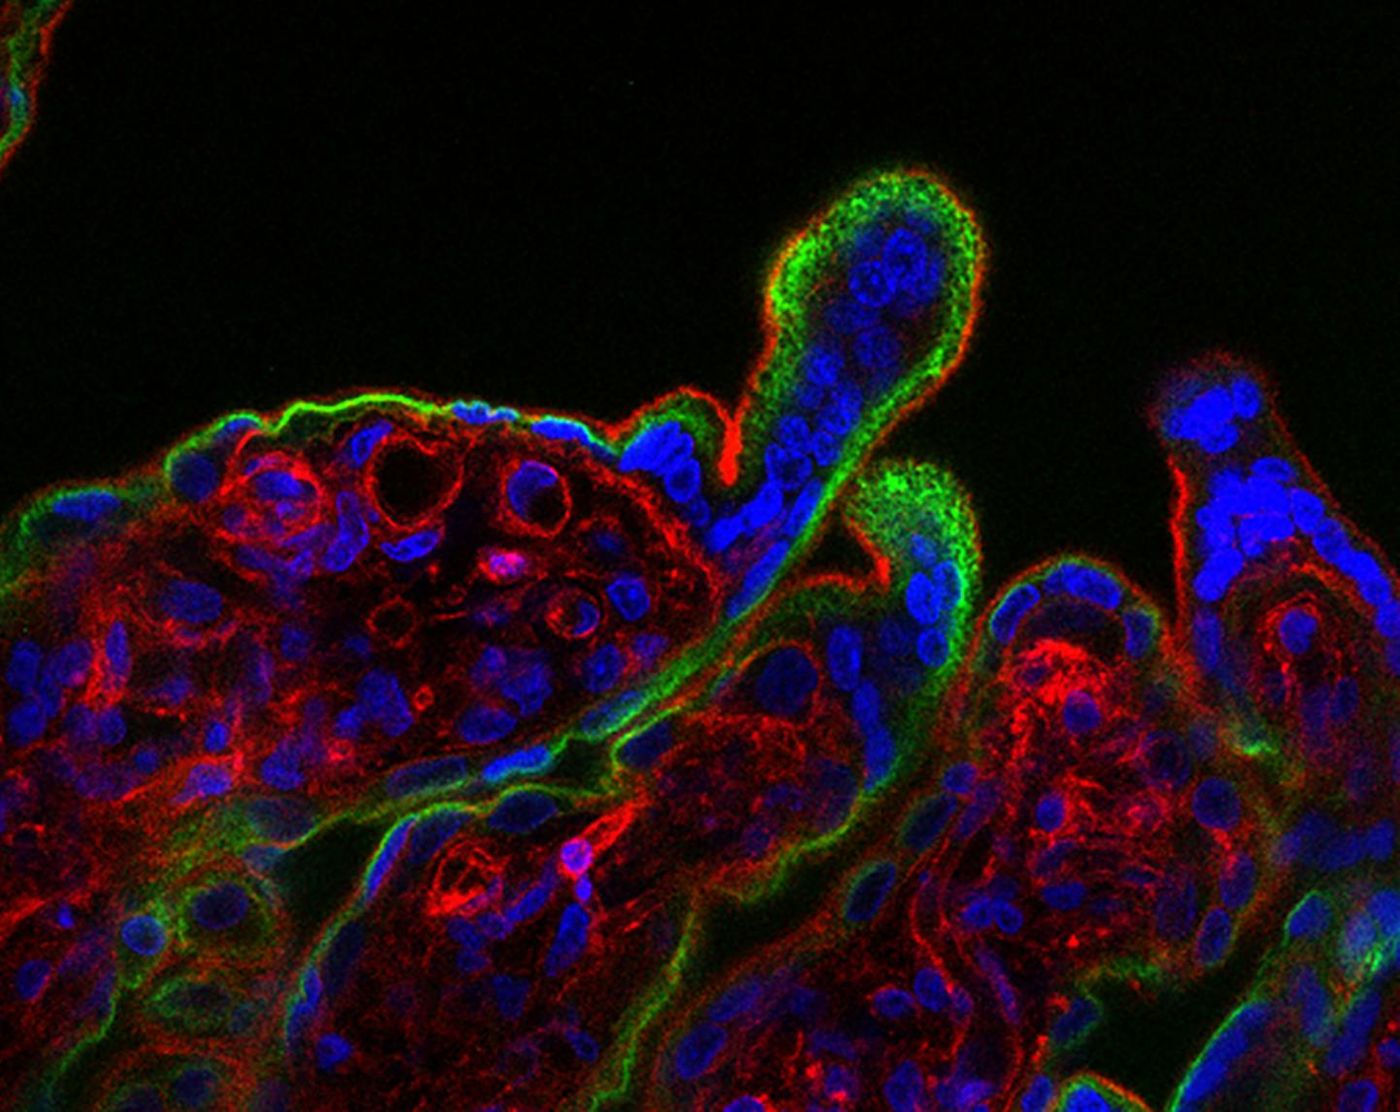 When human placental tissue (fluorescence microscopy image shown) is exposed to interferon-β, it develops syncytial knots. Credit: Yockey et al., Science Immunology (2018)